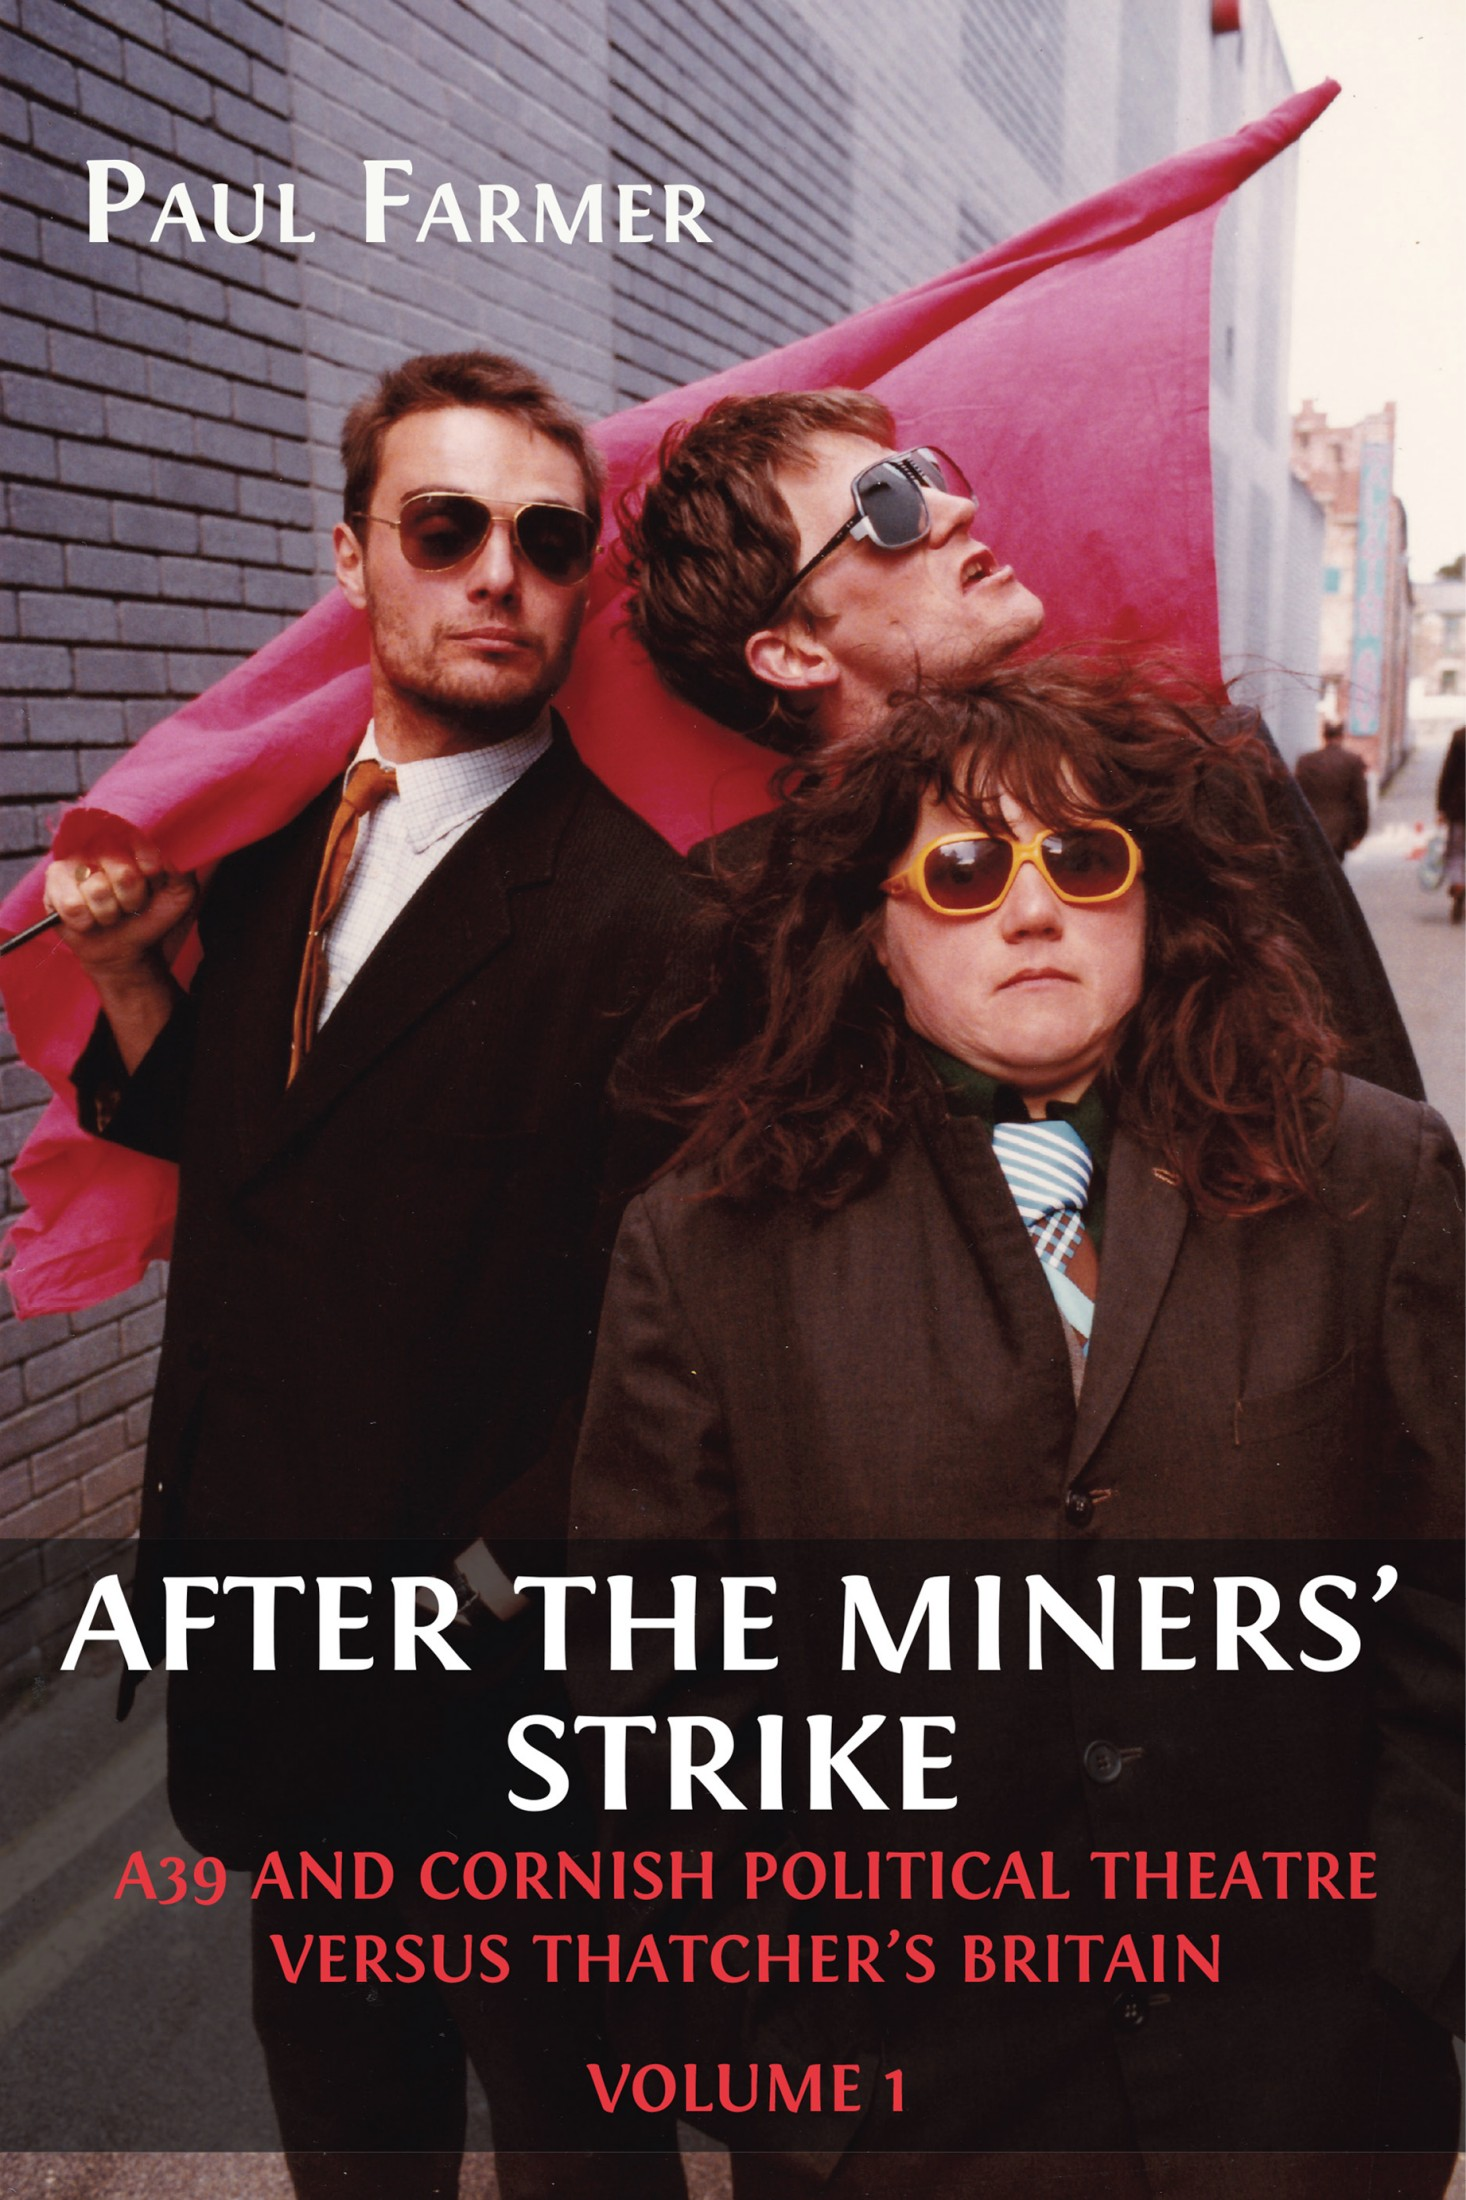 After the Miners’ Strike book cover image